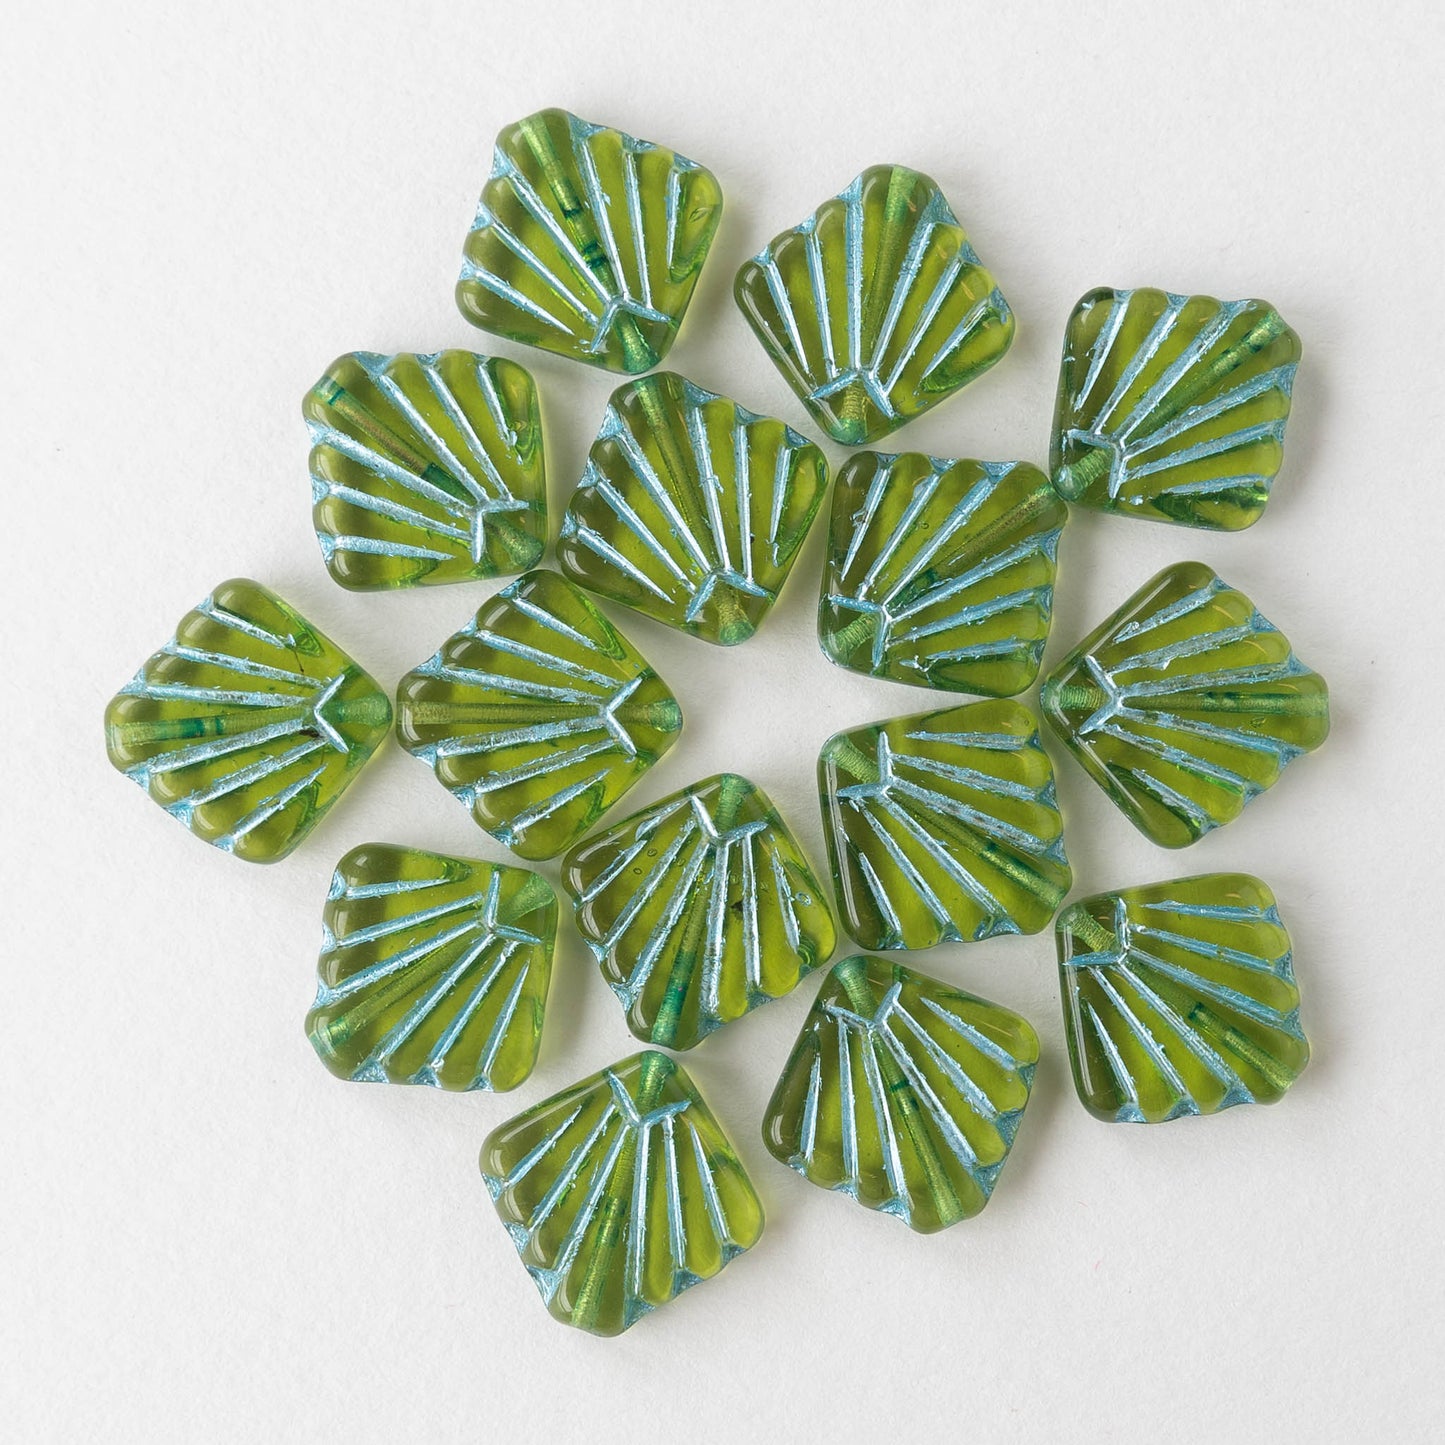 Load image into Gallery viewer, 14mm Diafan Beads - Green with Blue Wash  - 8 beads
